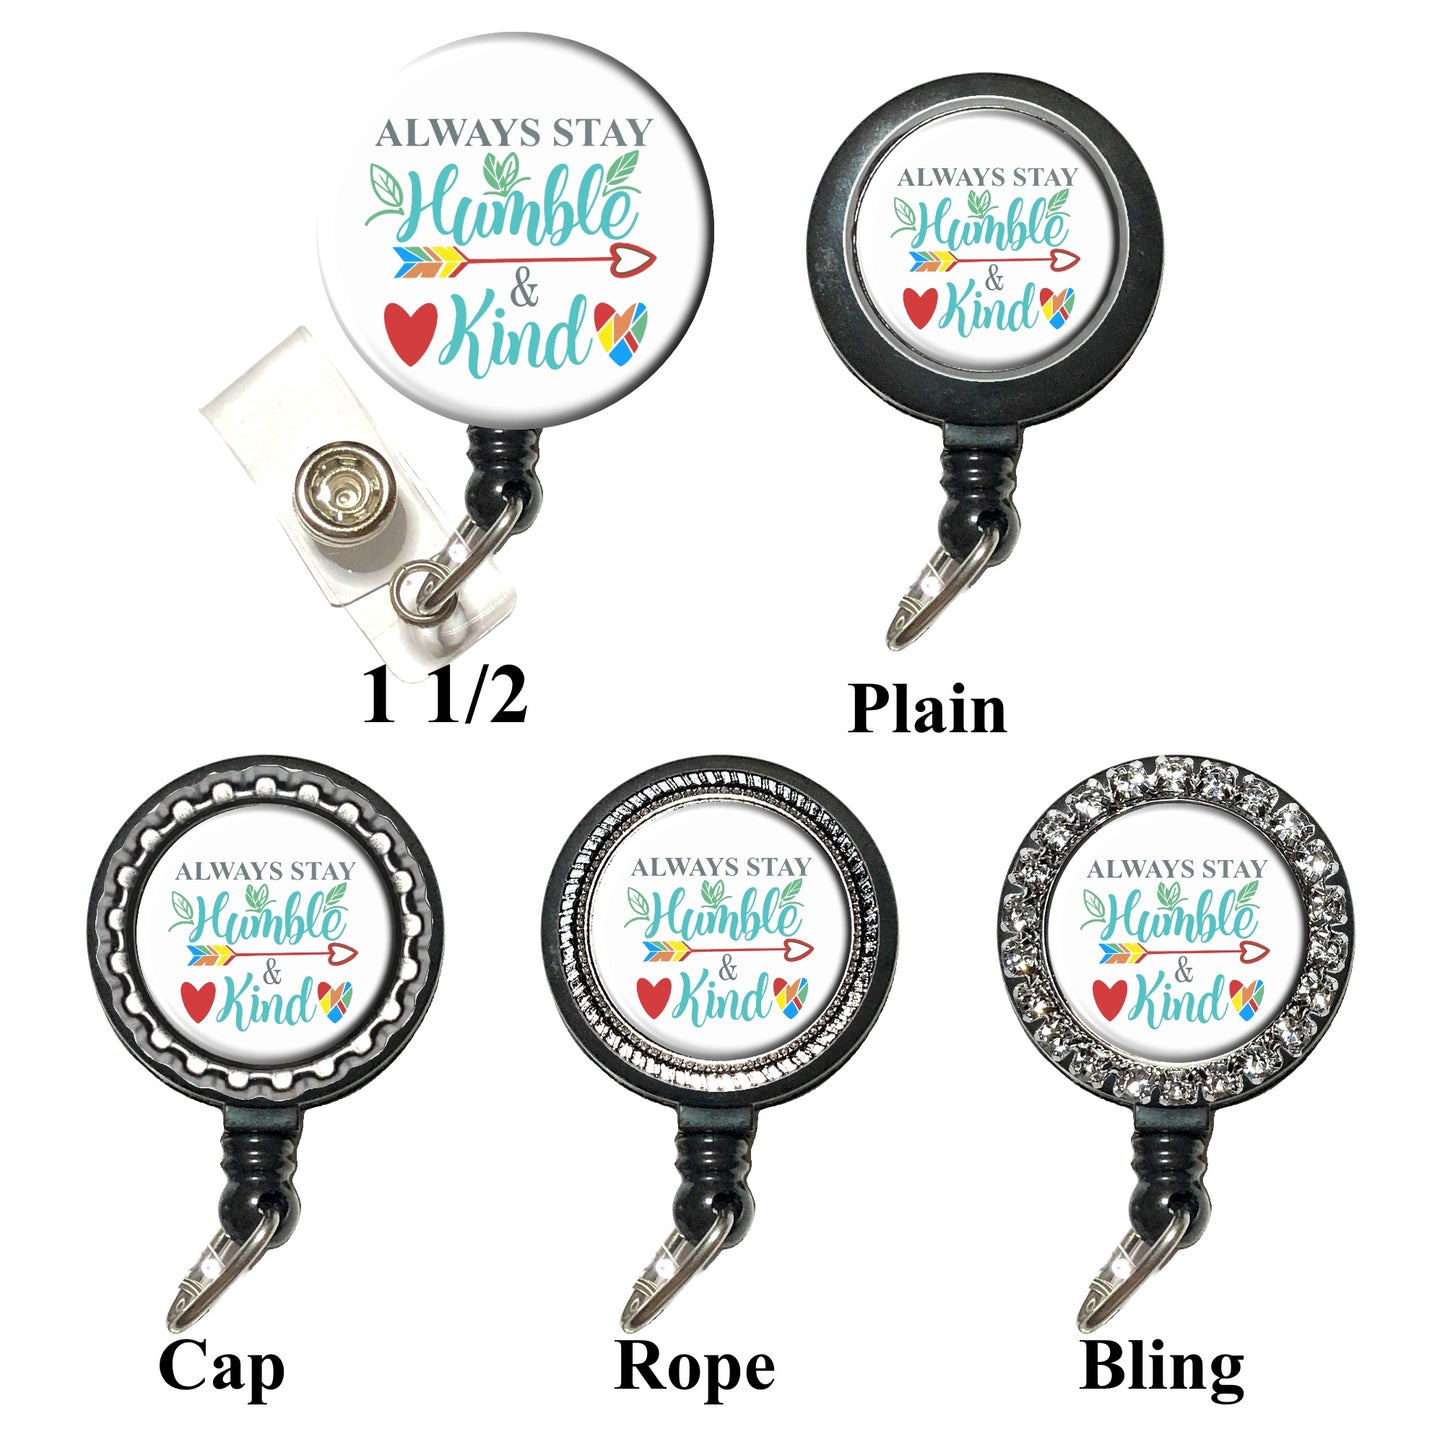 Always Stay Humble and Kind Stethoscope Id Tag